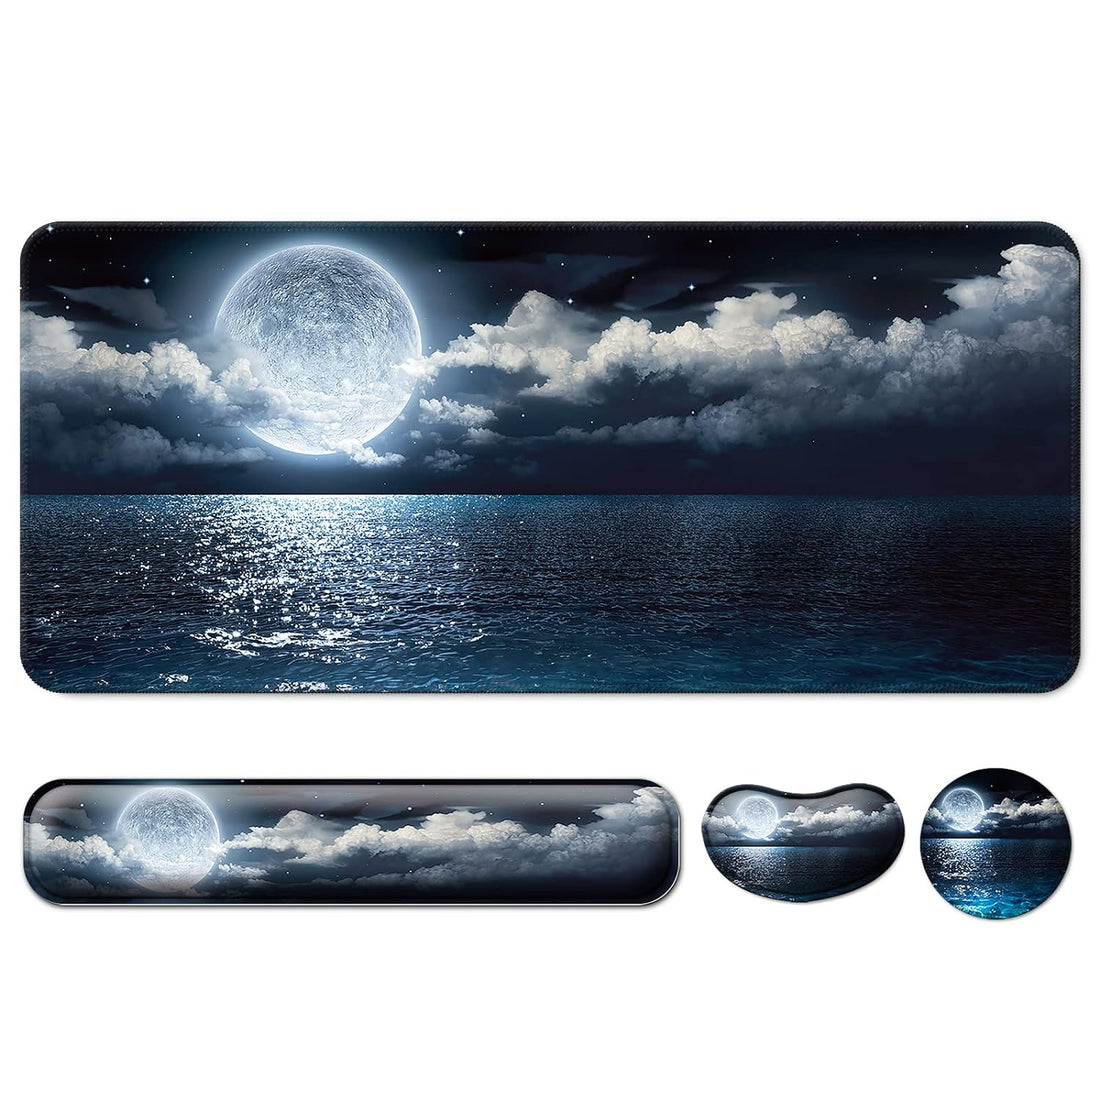 Keyboard Wrist Rest and Desk Mouse Pad with Wrist Support (4 PCS Set ) , Large Gaming Extended XXL Desk Pad Table Mat ,Mousepad with Ergonomic Wrist Rest for Desktop Computer -Moon Ocean